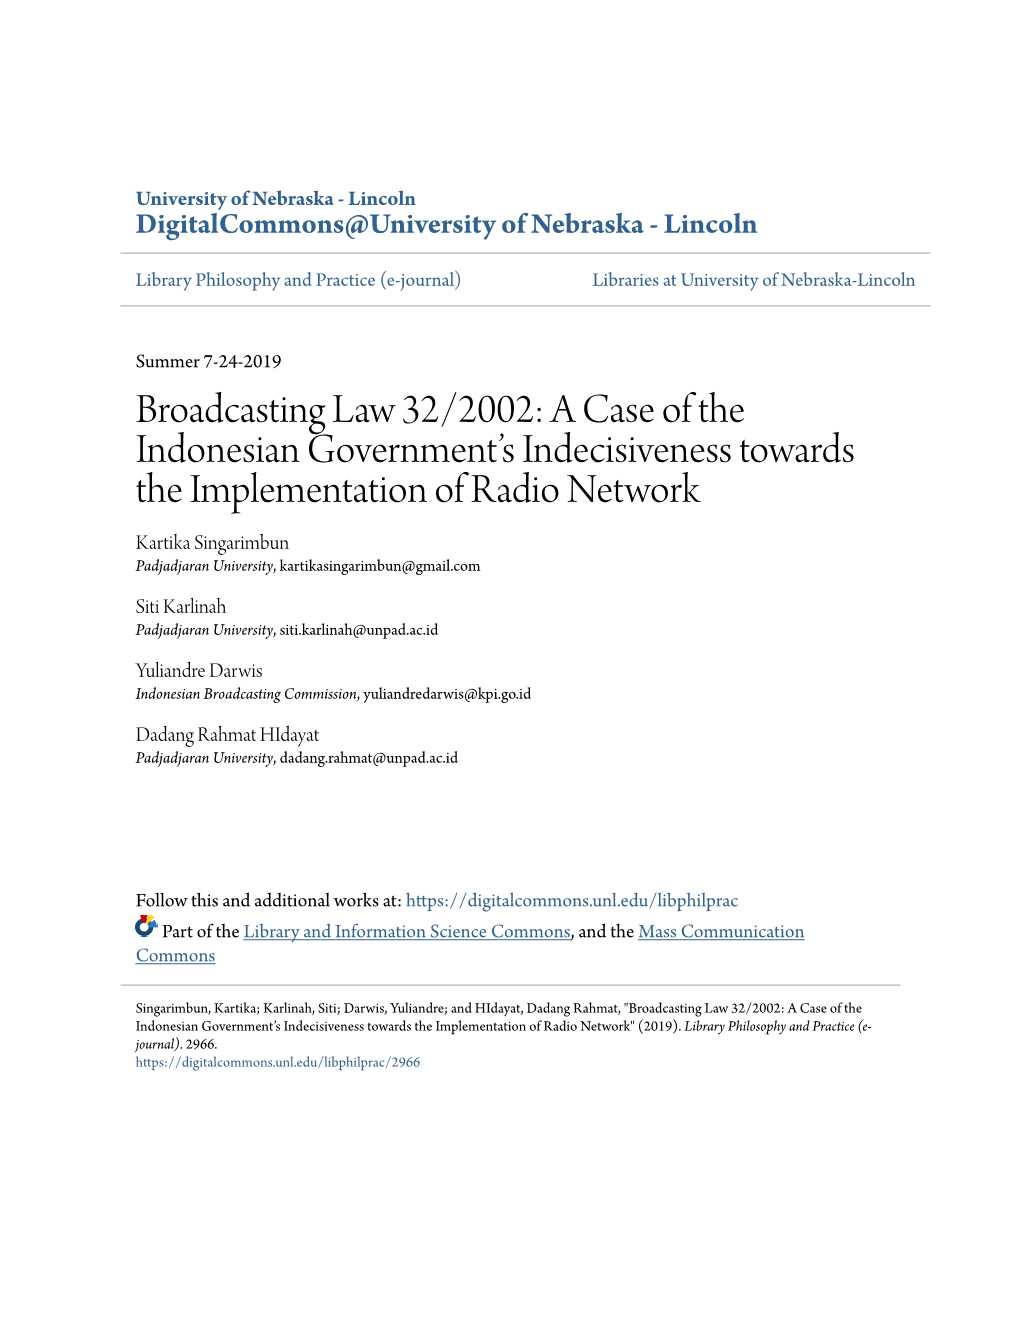 Broadcasting Law 32/2002: a Case of the Indonesian Government's Indecisiveness Towards the Implementation of Radio Network